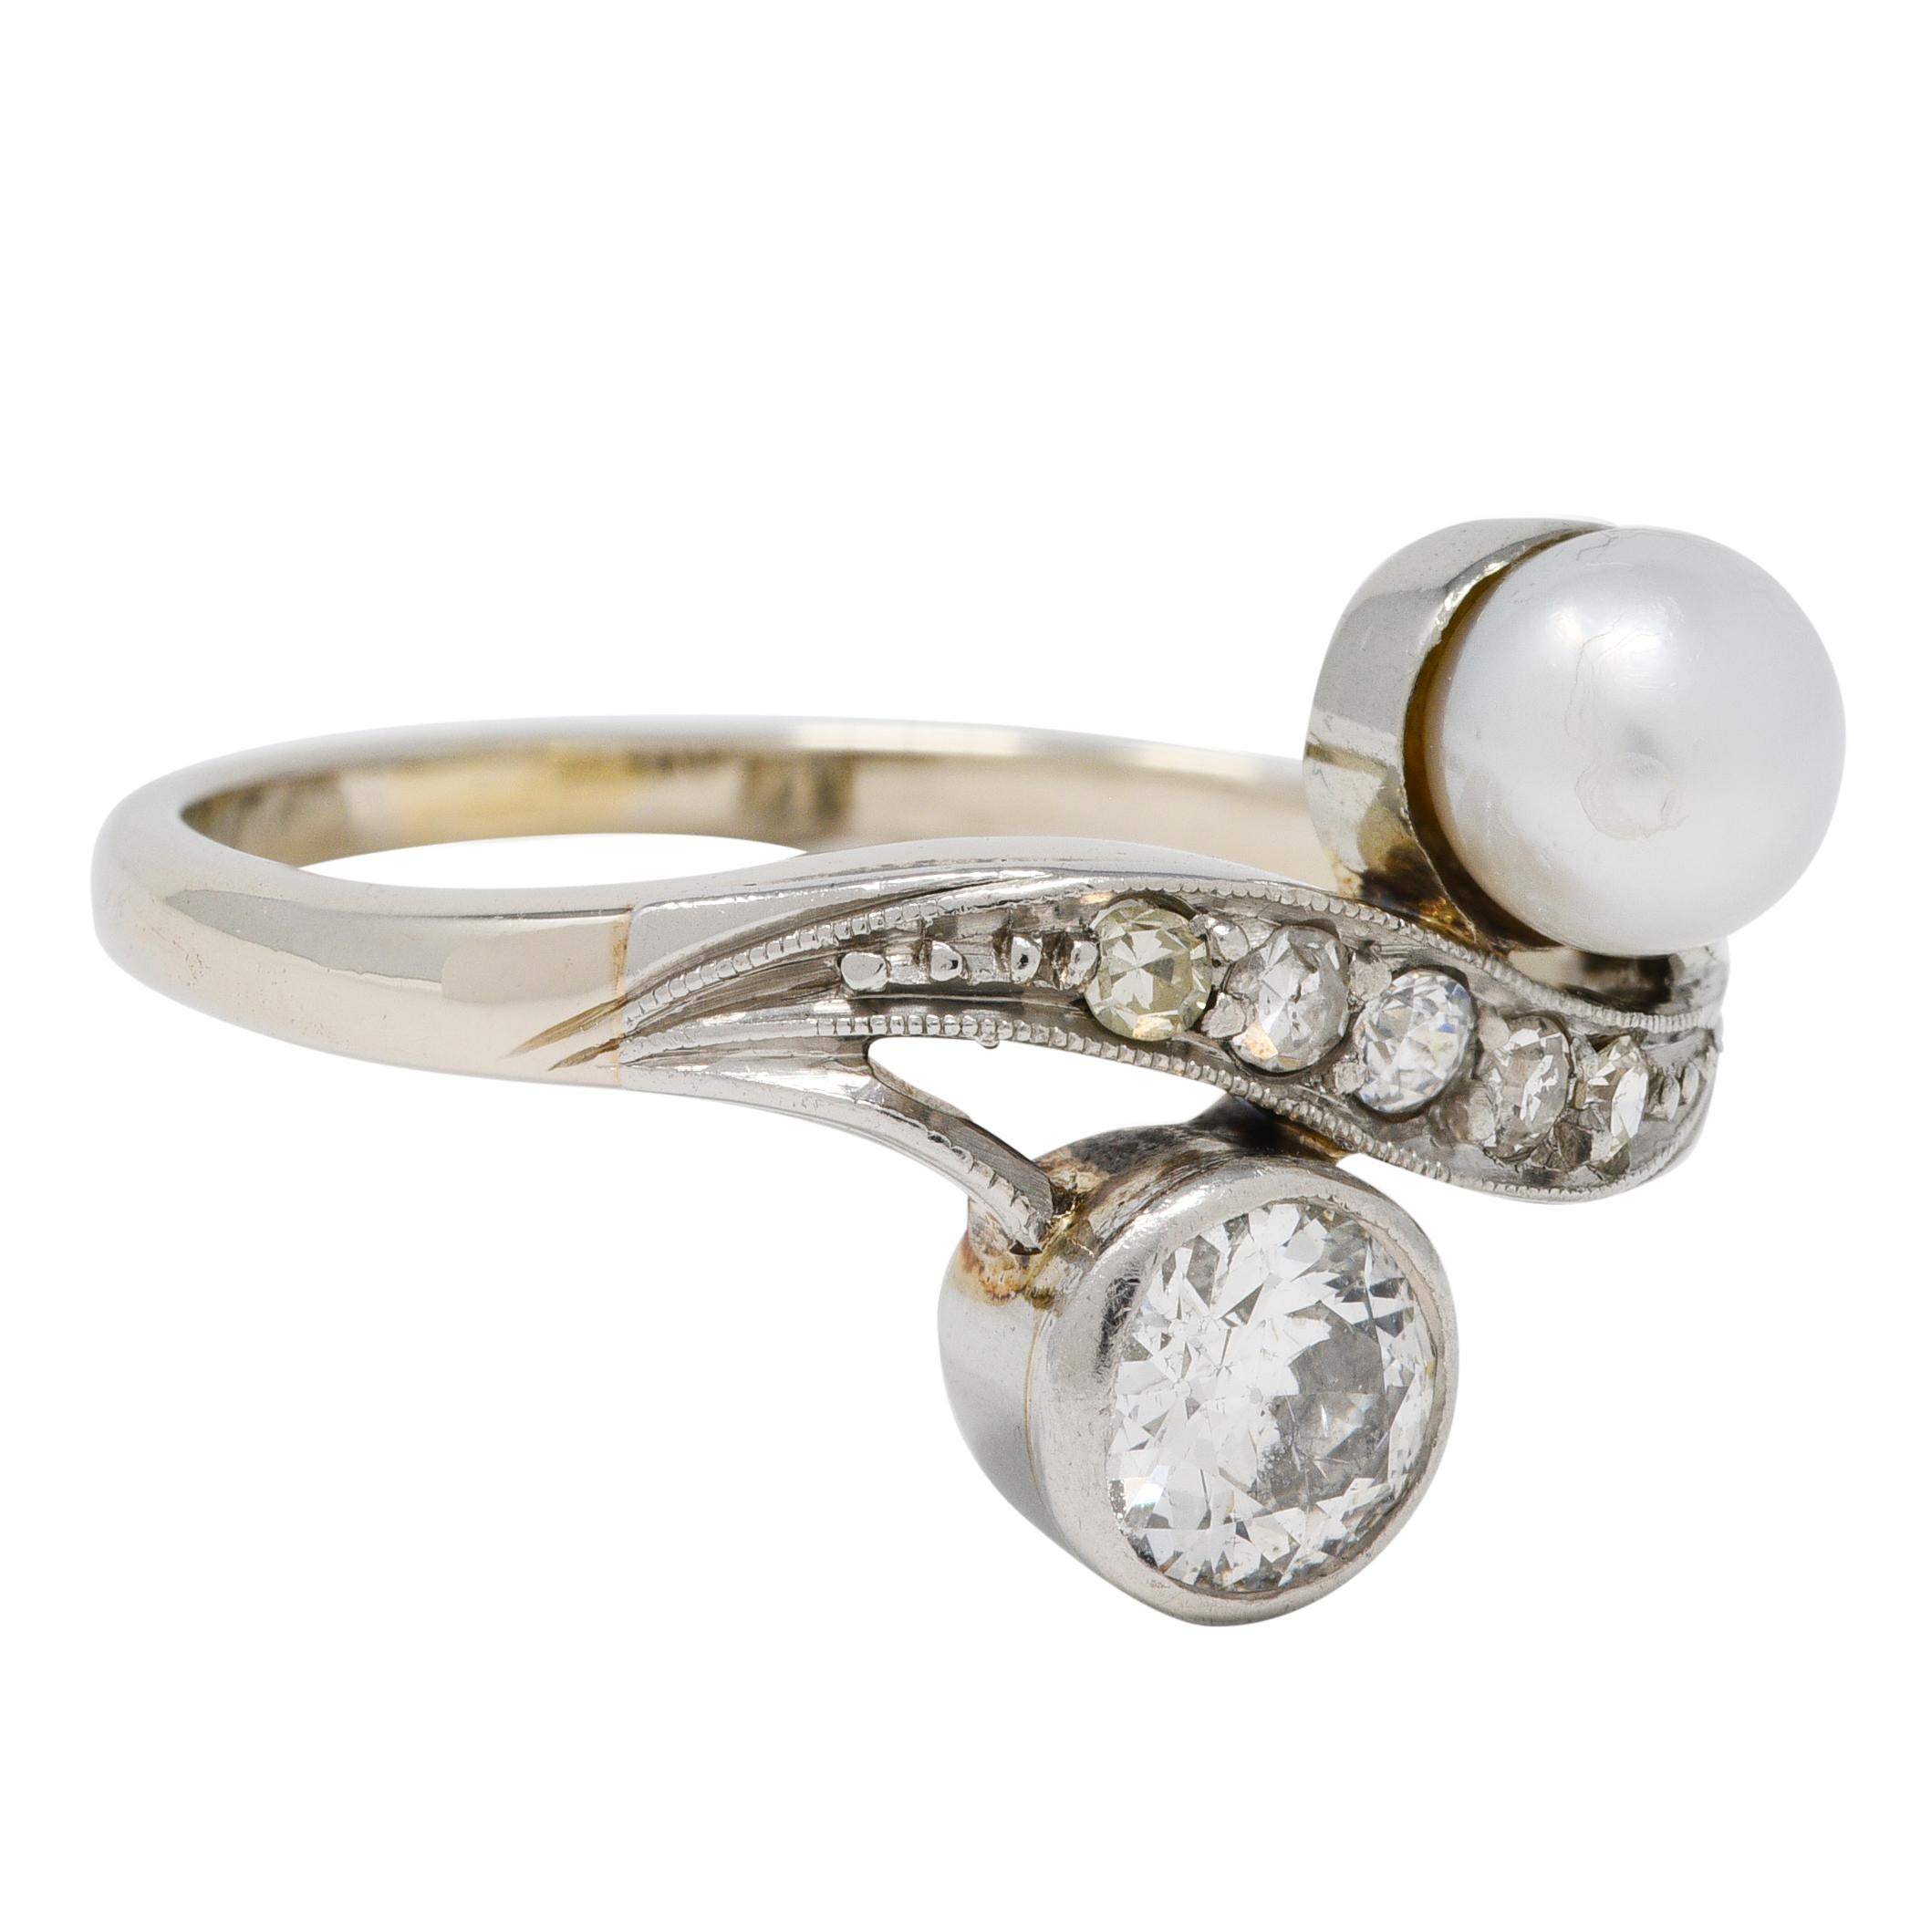 Bypass style ring features a pearl and old European cut diamond
Balanced in a Toi et Moi style - French to mean 